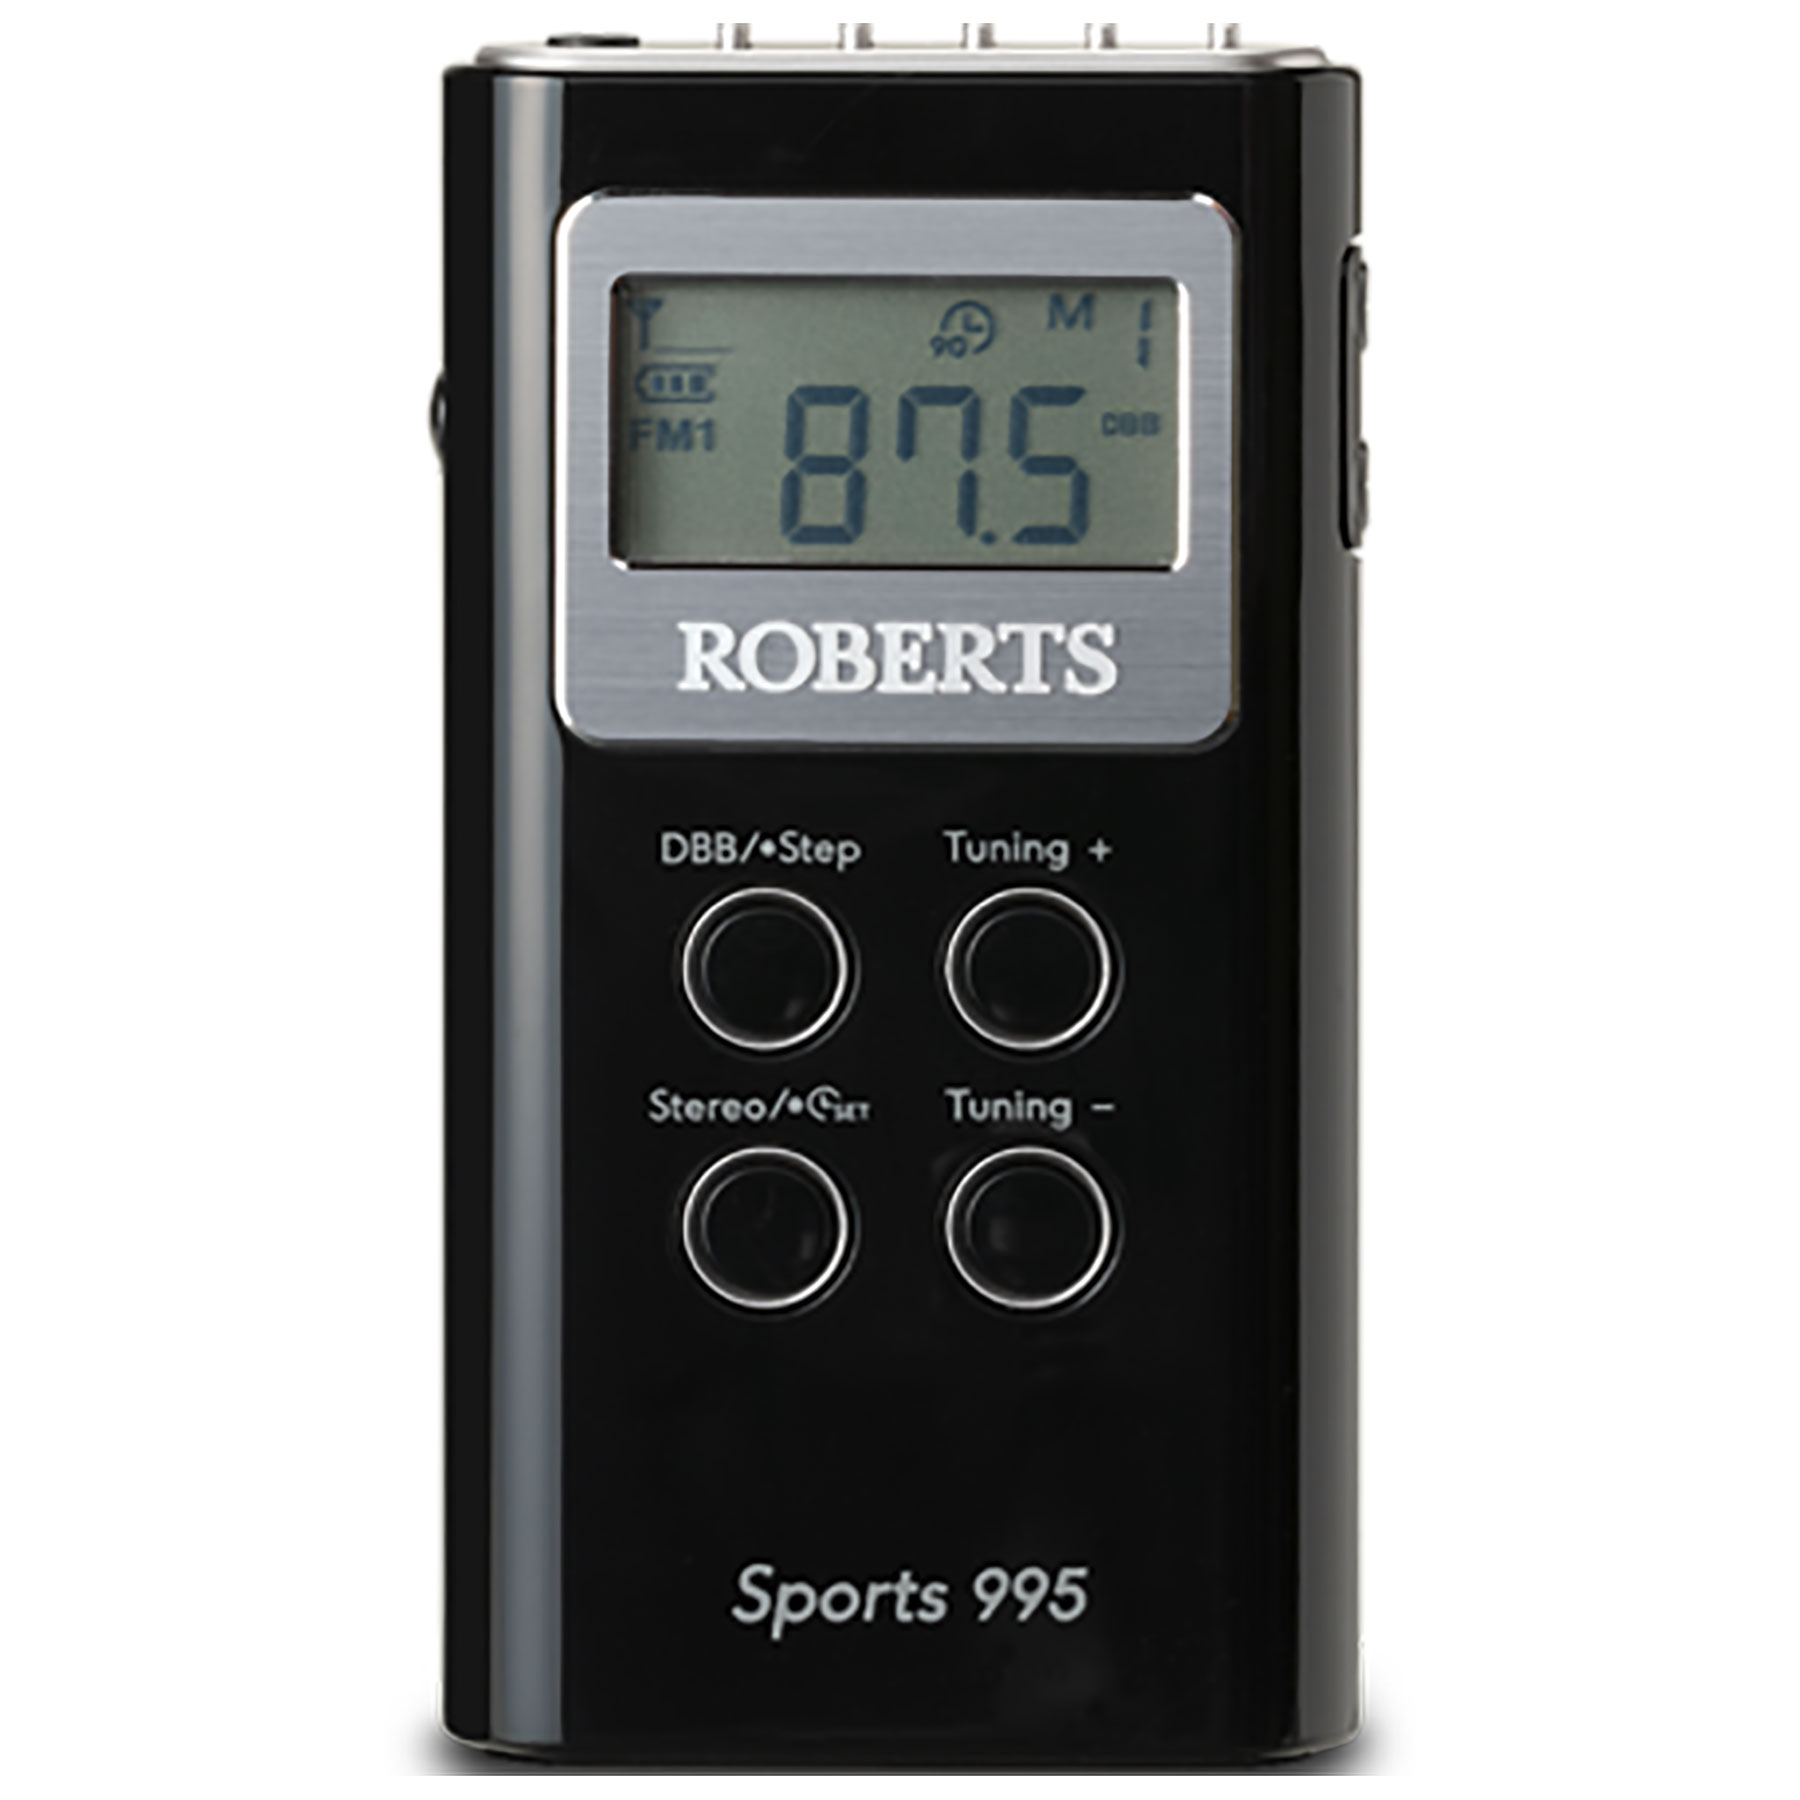 Image of Roberts SPORTS995 2 Band PLL Synthesised Stereo Radio in Black AM FM